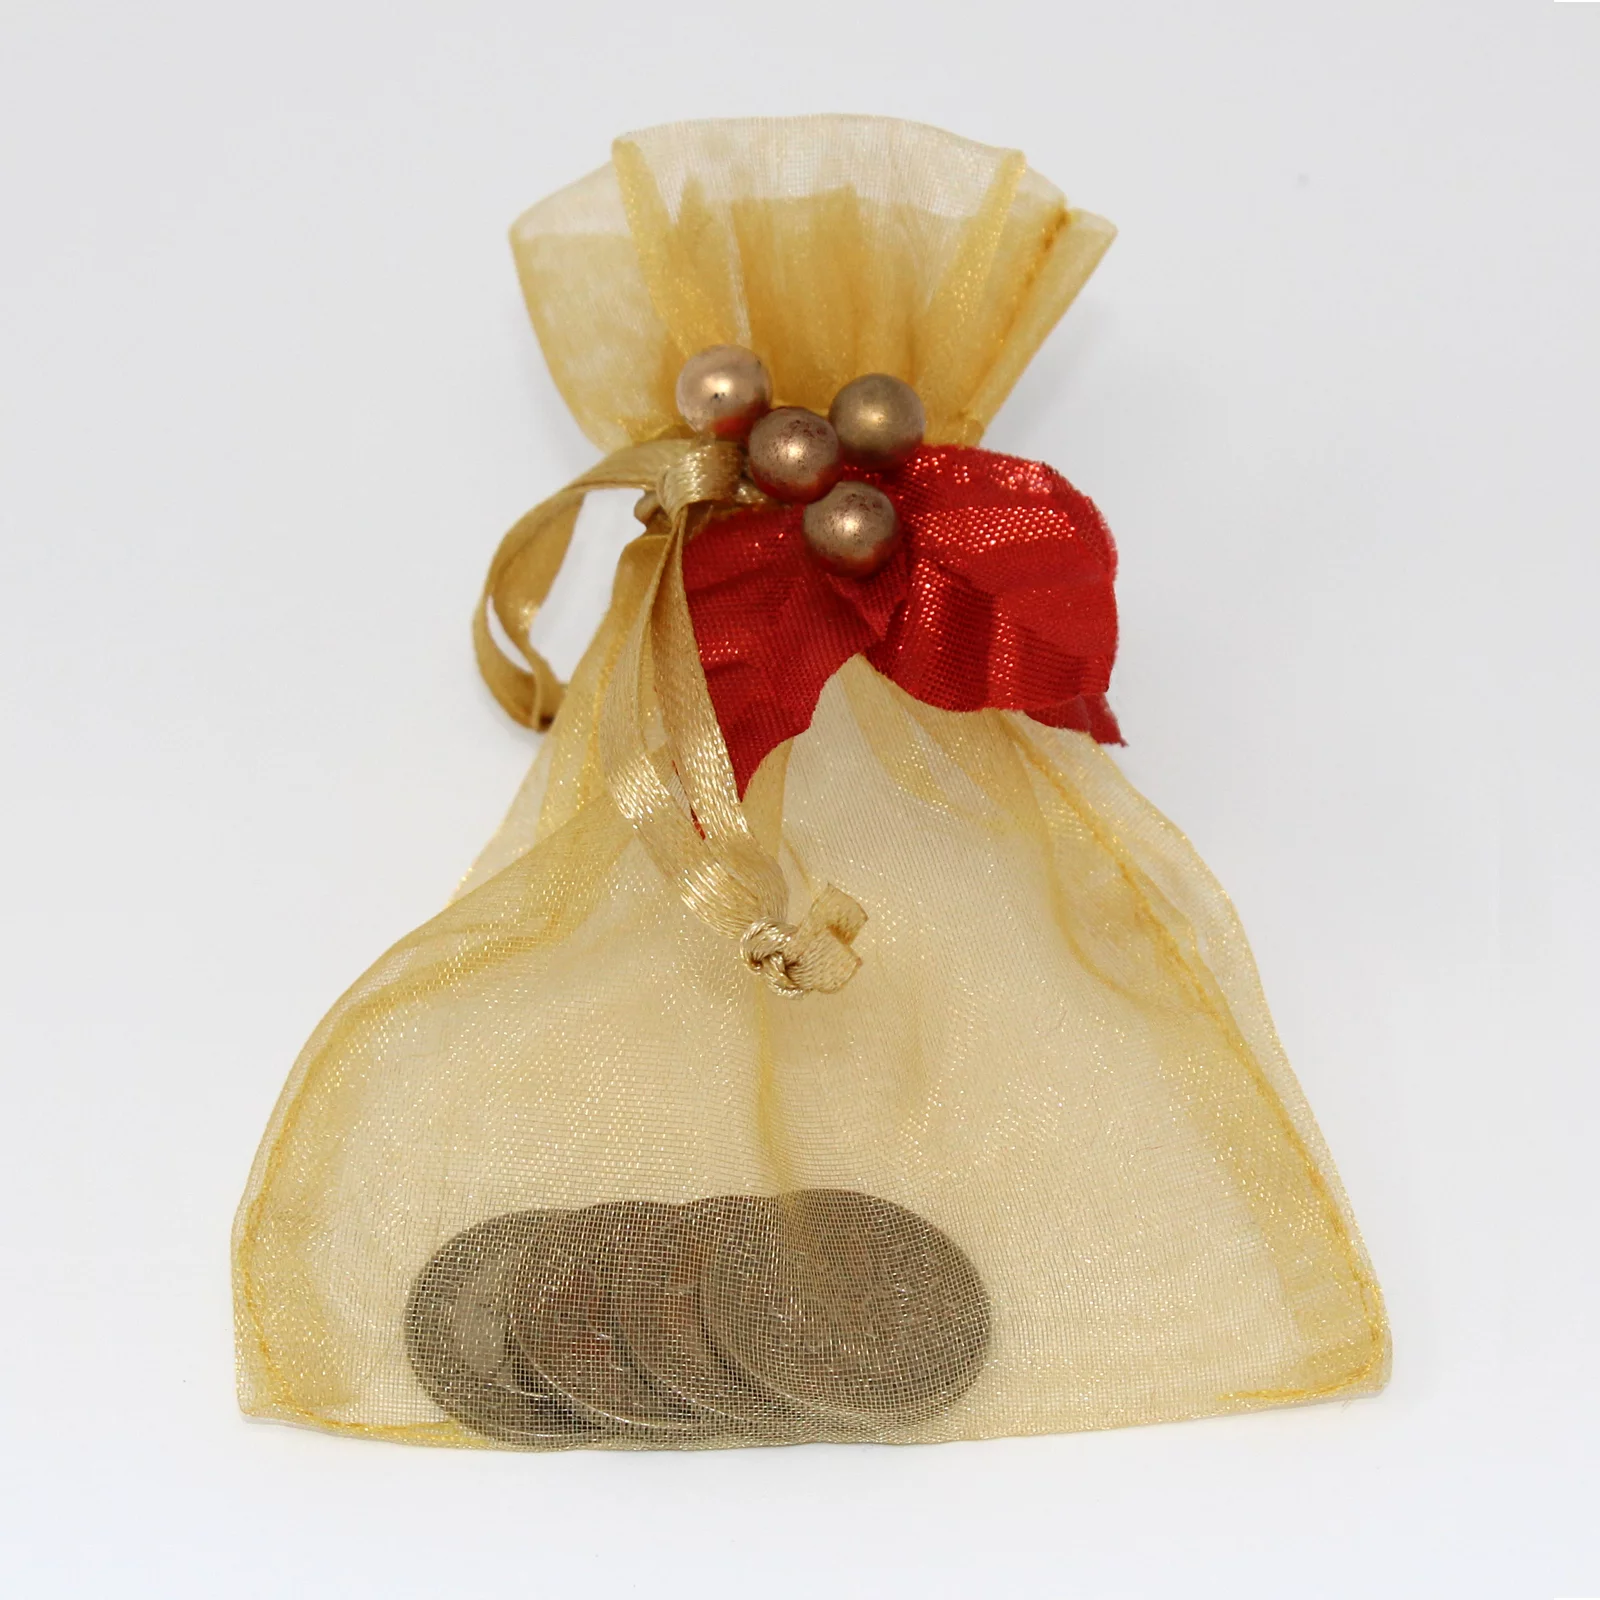 Lucky Sixpence - Set of Four in a Gold Coloured Keepsake Bag